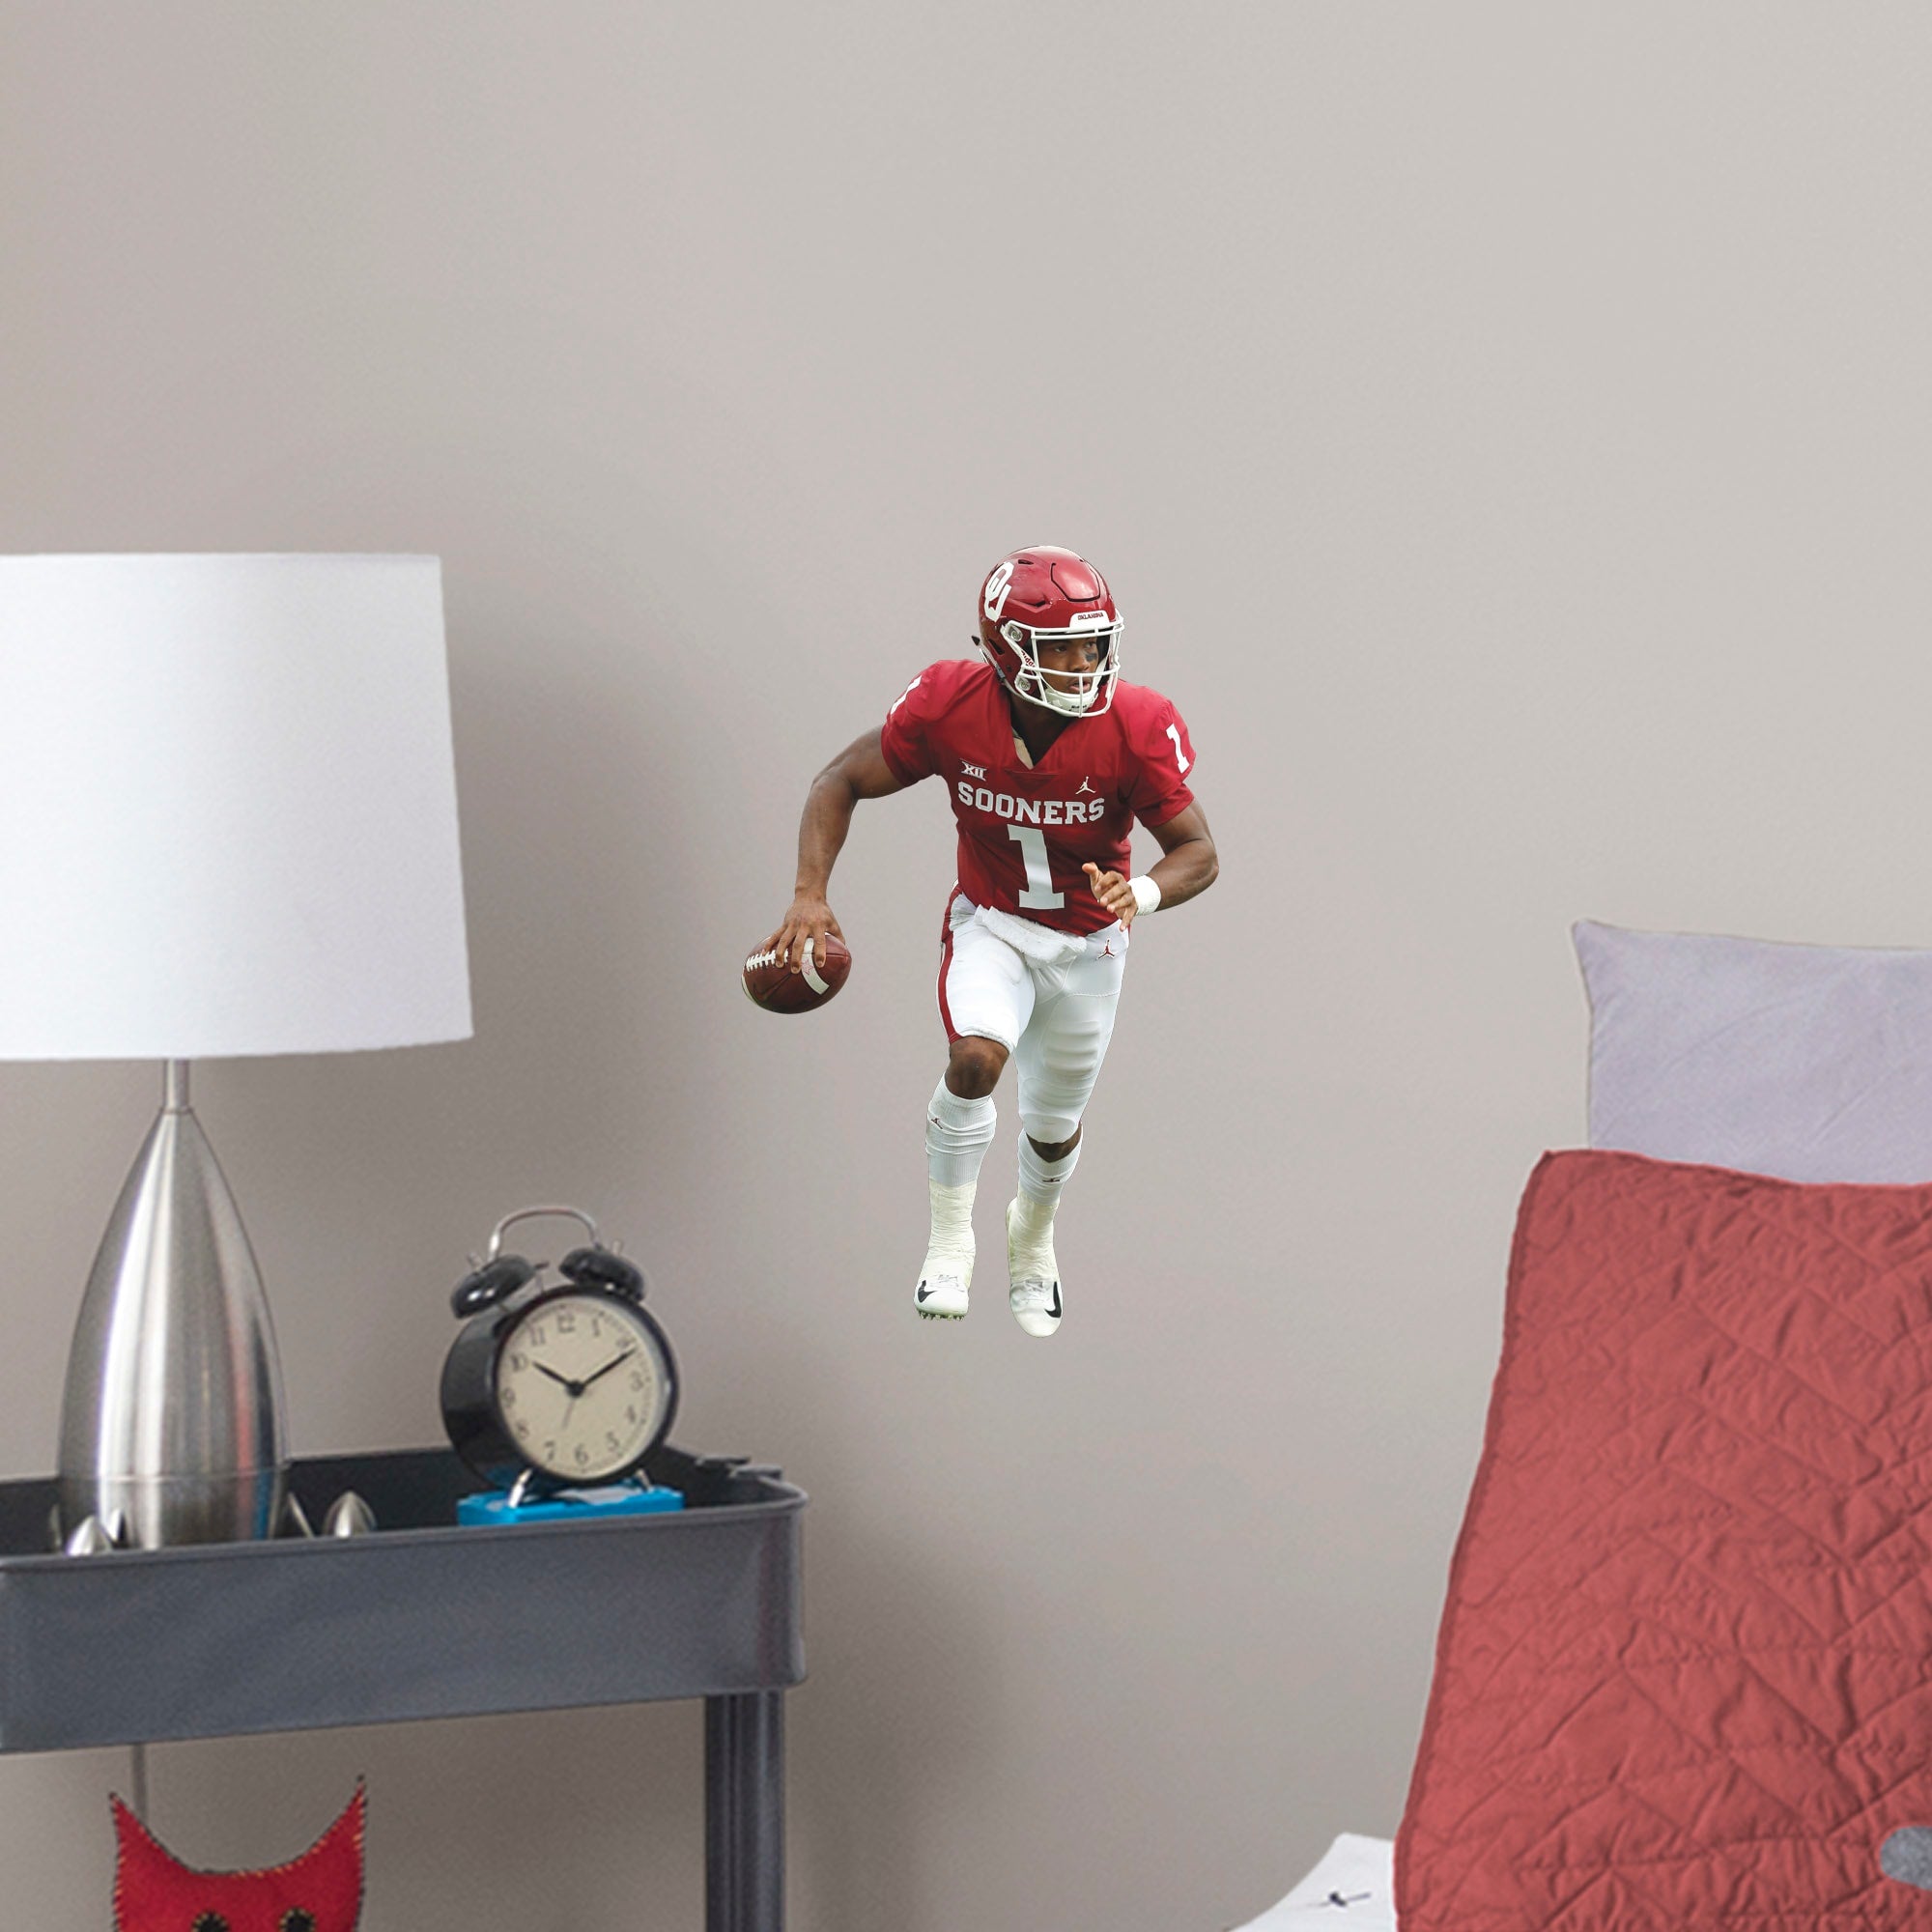 Kyler Murray for Oklahoma Sooners: Oklahoma - Officially Licensed Removable Wall Decal Large by Fathead | Vinyl